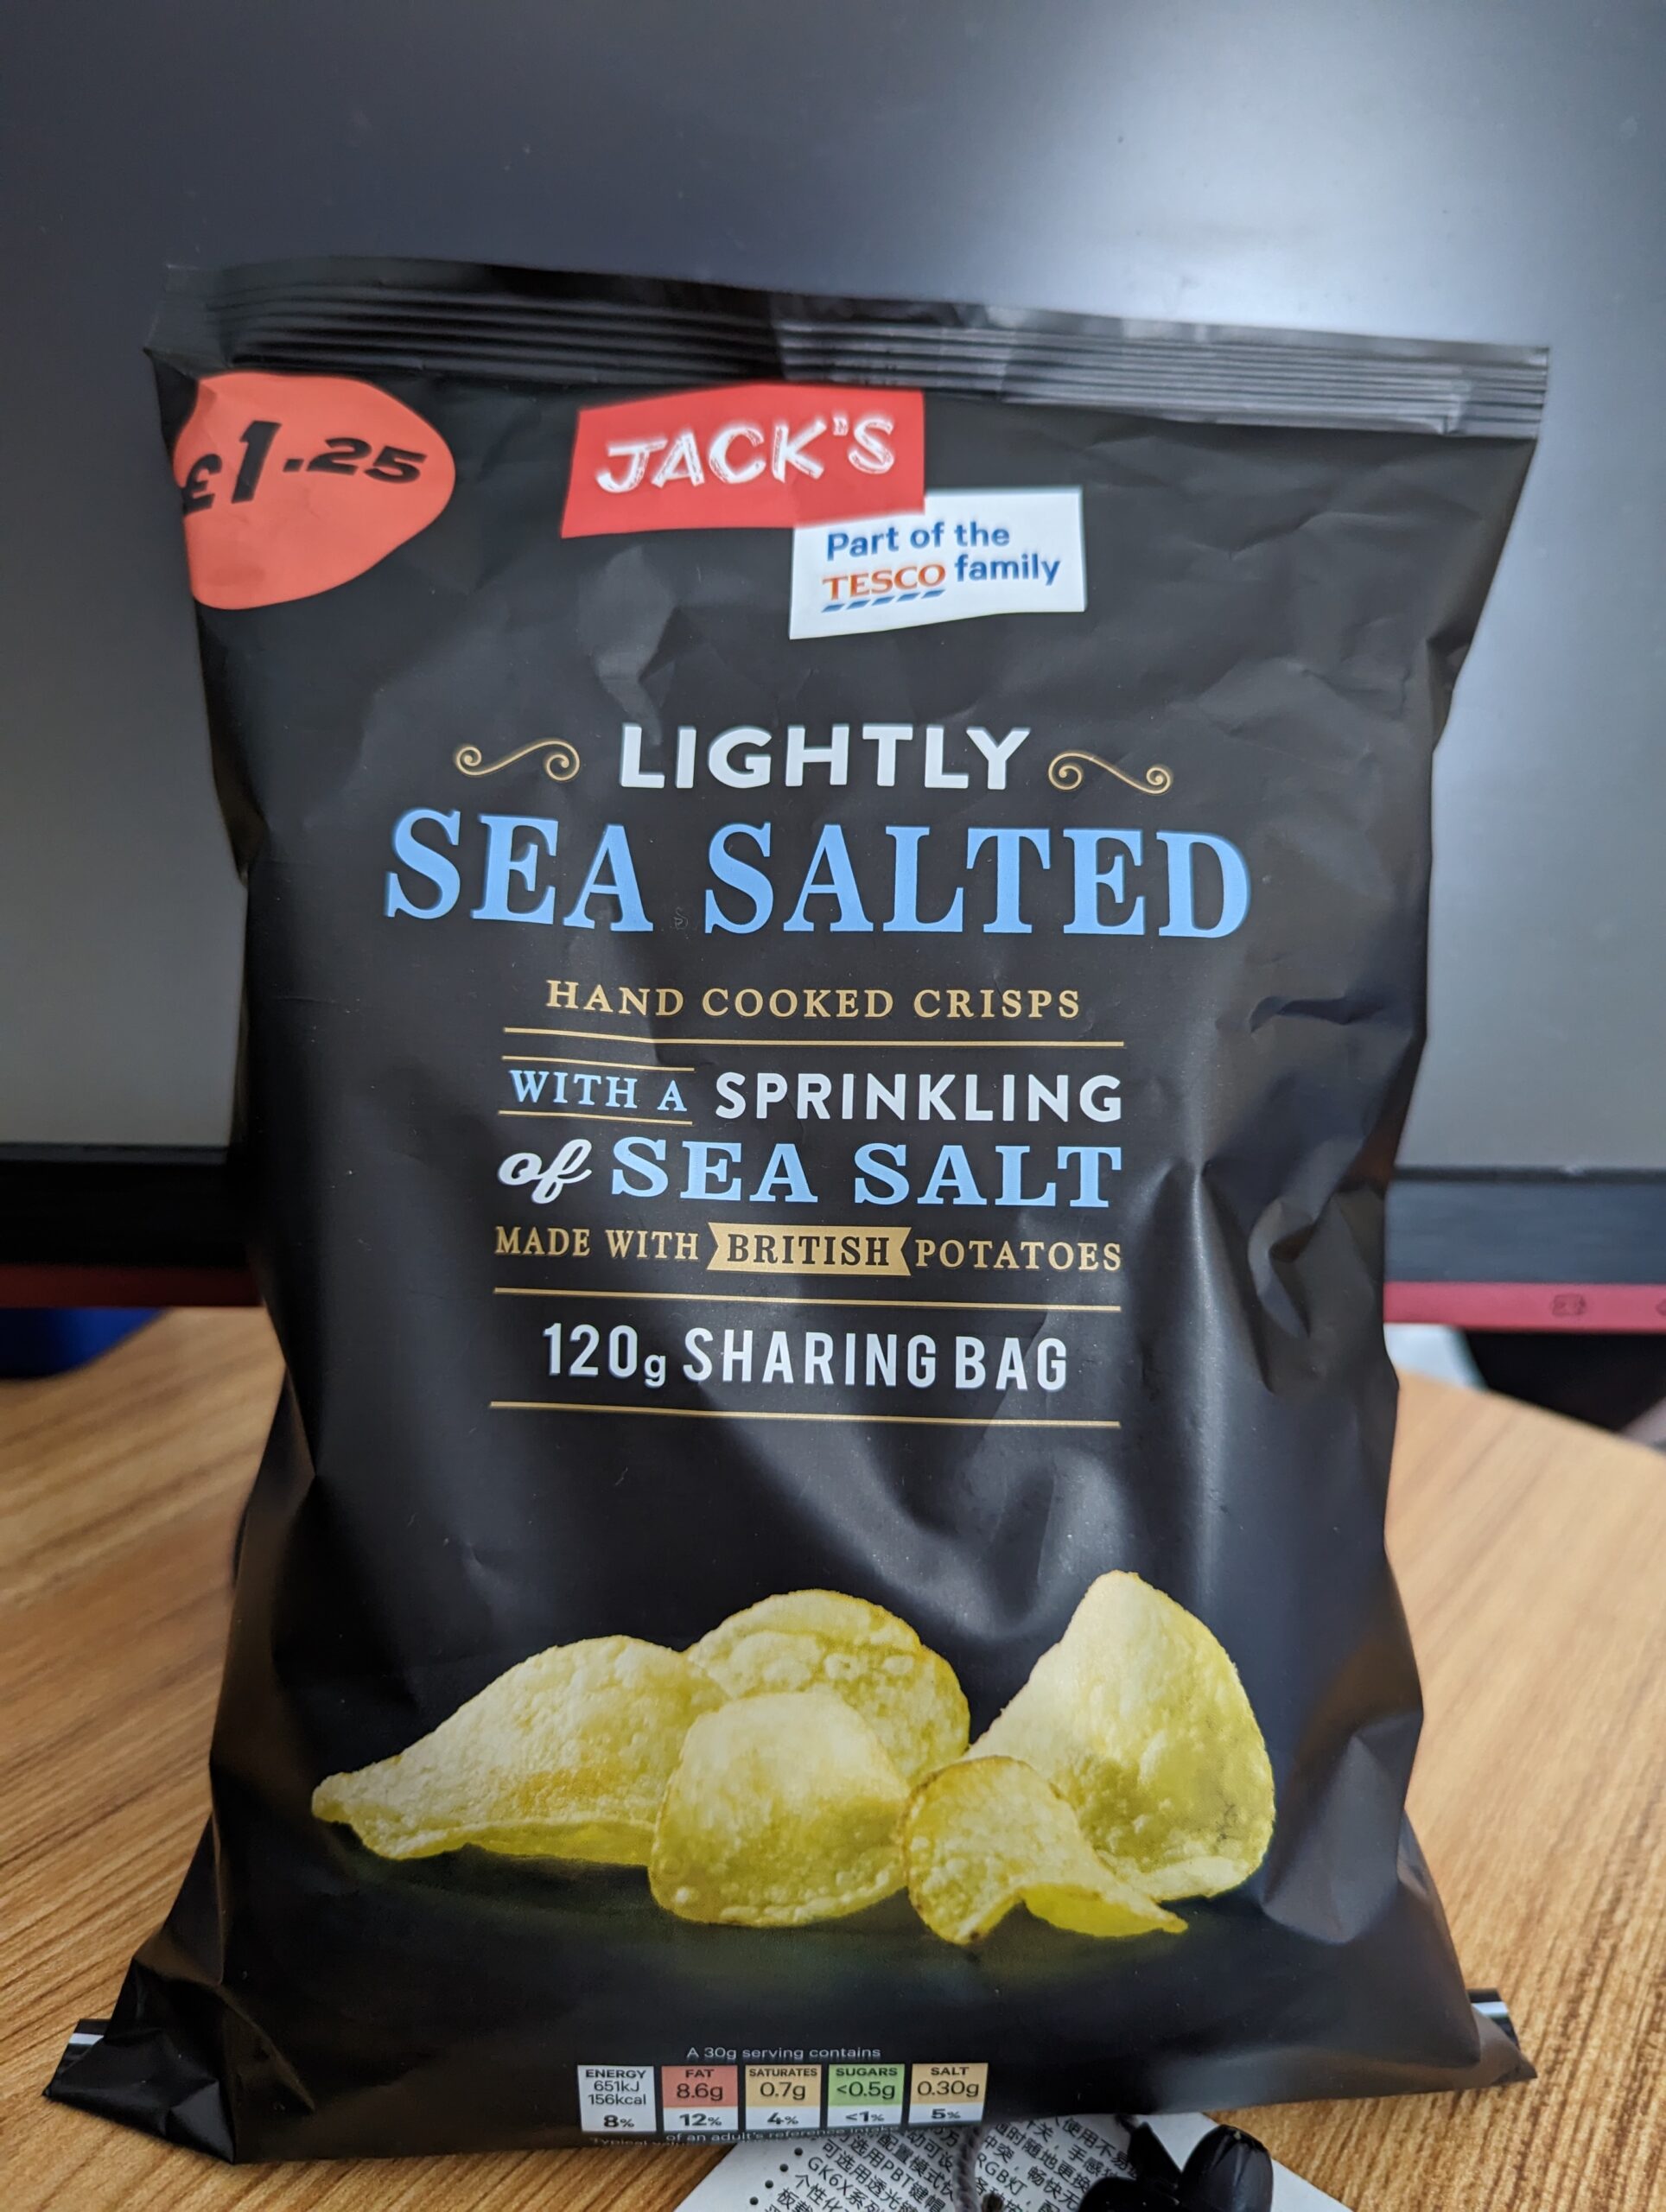 Jack's Lightly Sea Salted Hand Cooked Crisps